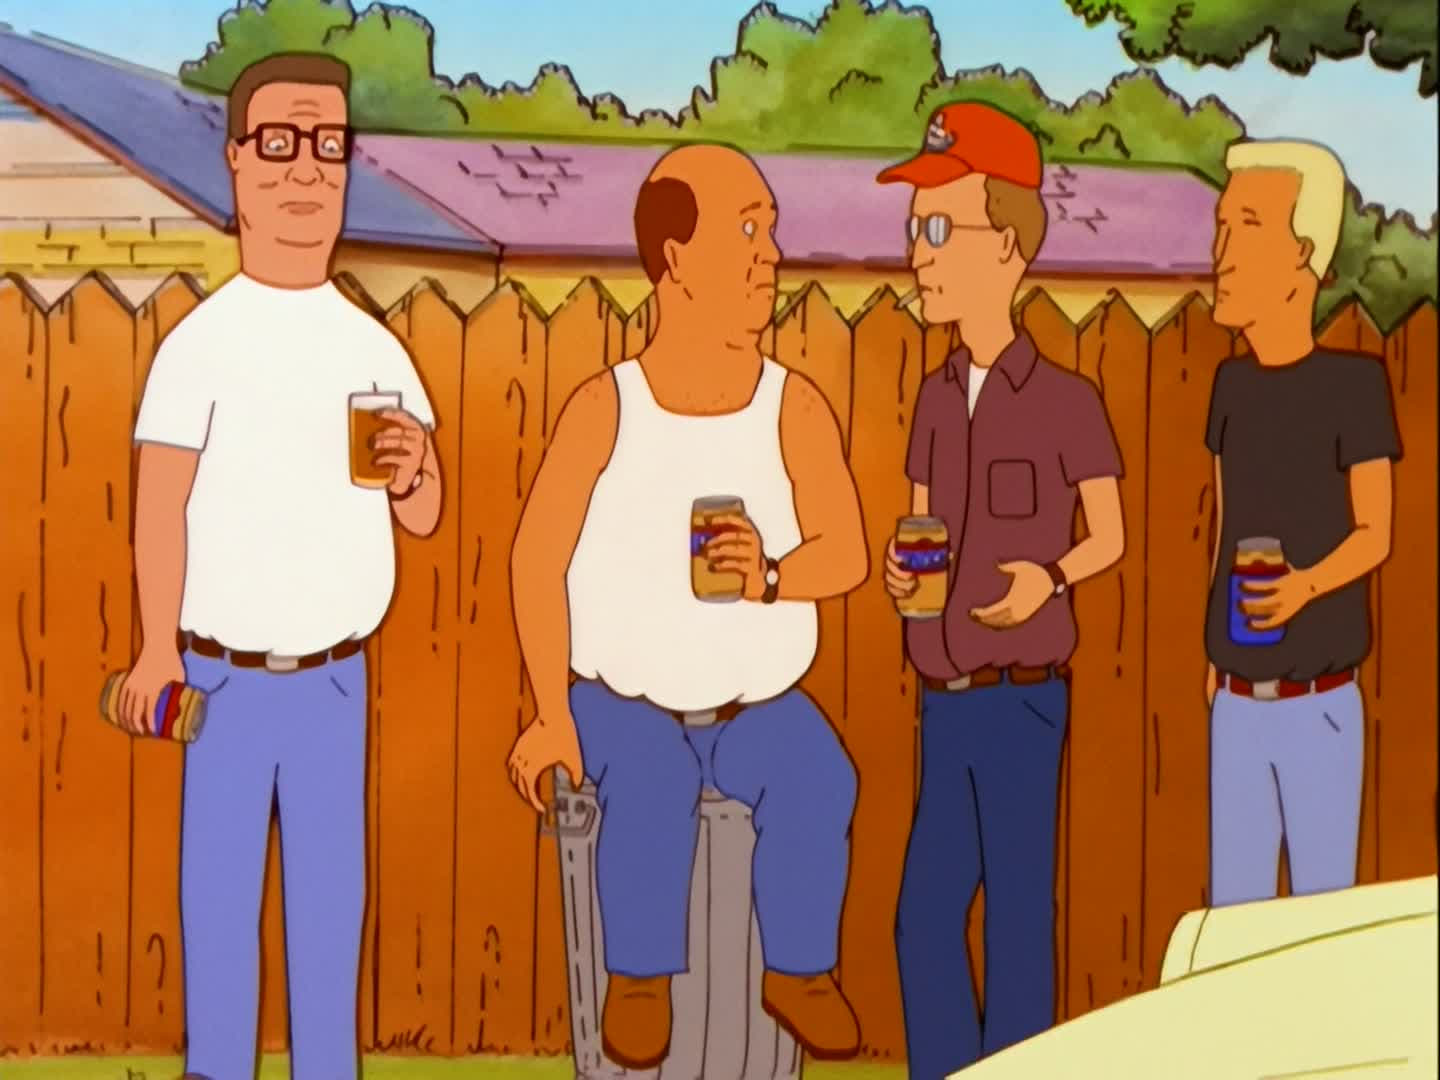 King of the Hill: Season 3, Where to watch streaming and online in New  Zealand